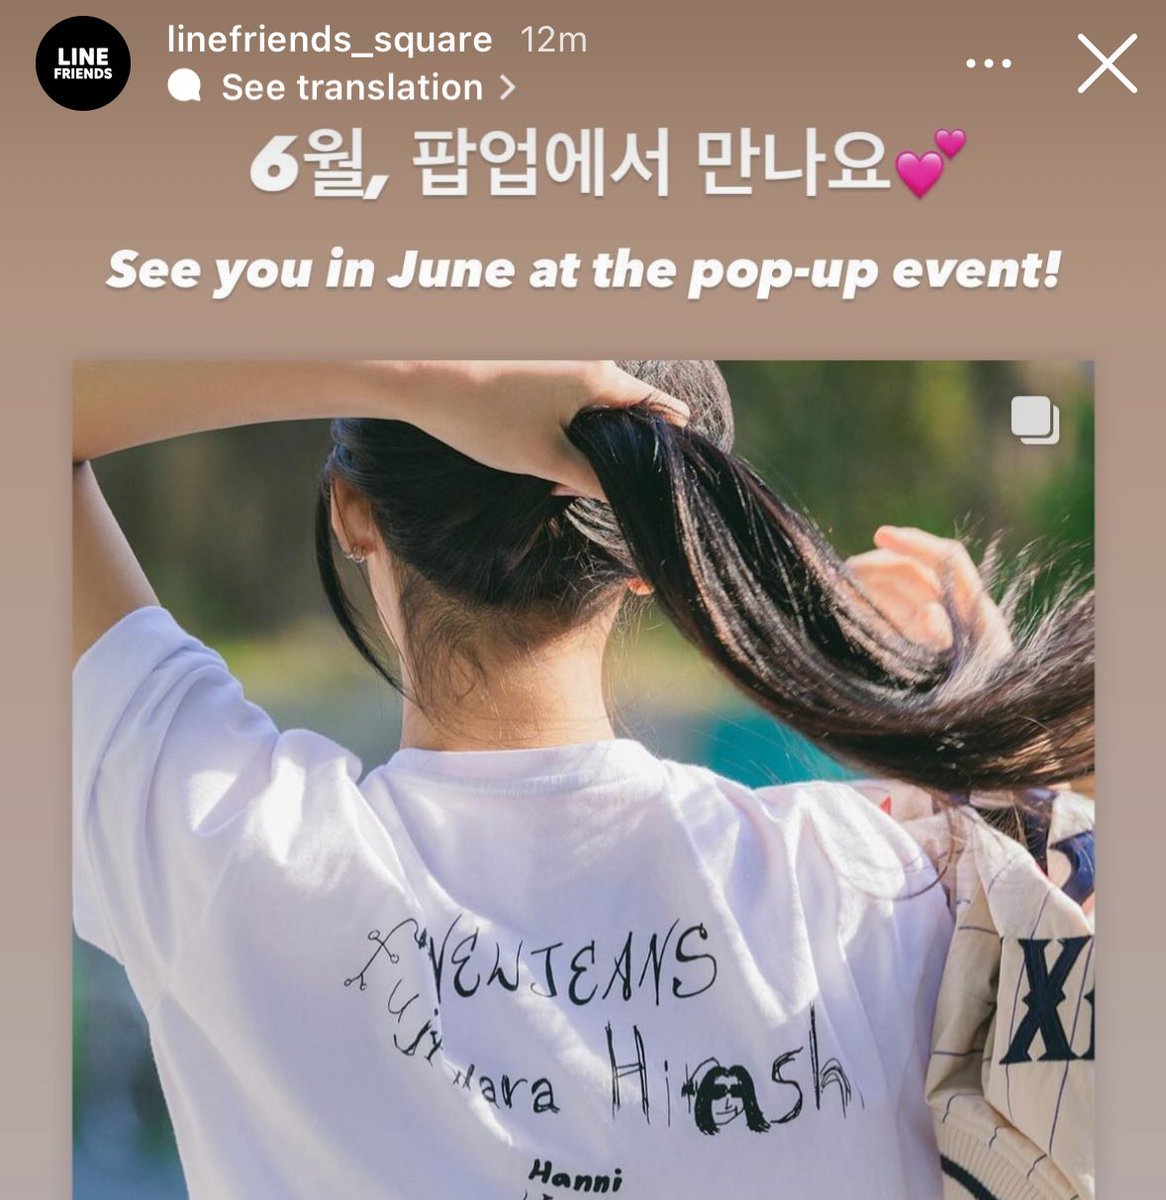 Line Friends Square: See you in June are the pop up event ! 6월, 팝업에서 만나요 #뉴진스 #NewJeans #藤原ヒロシ #Fujiwarahiroshi